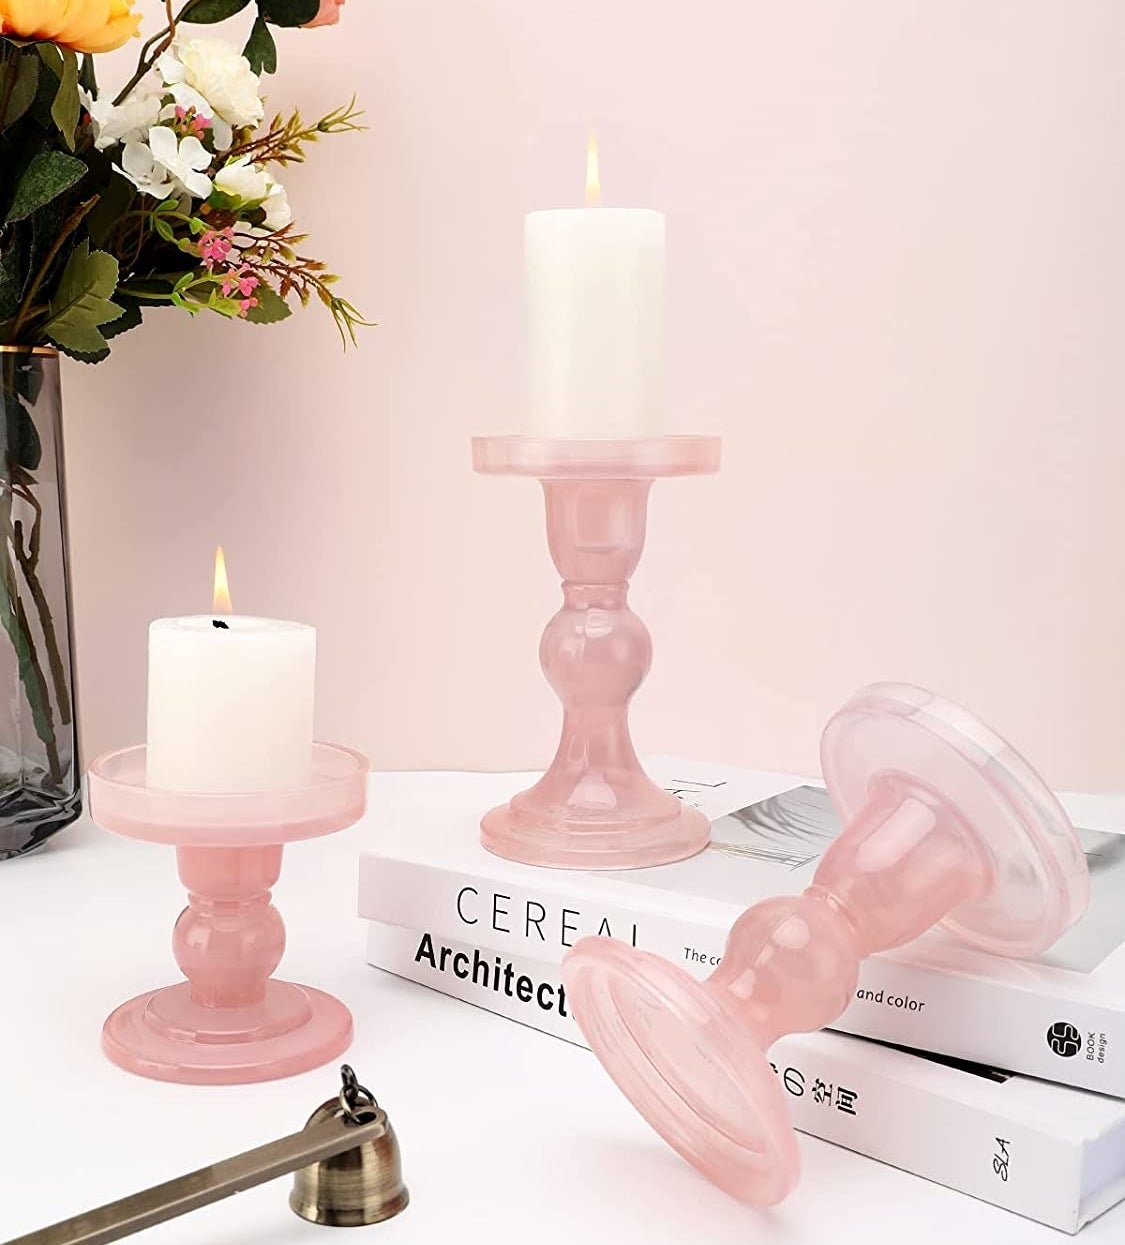 The three candle holders with candles on them on top of books